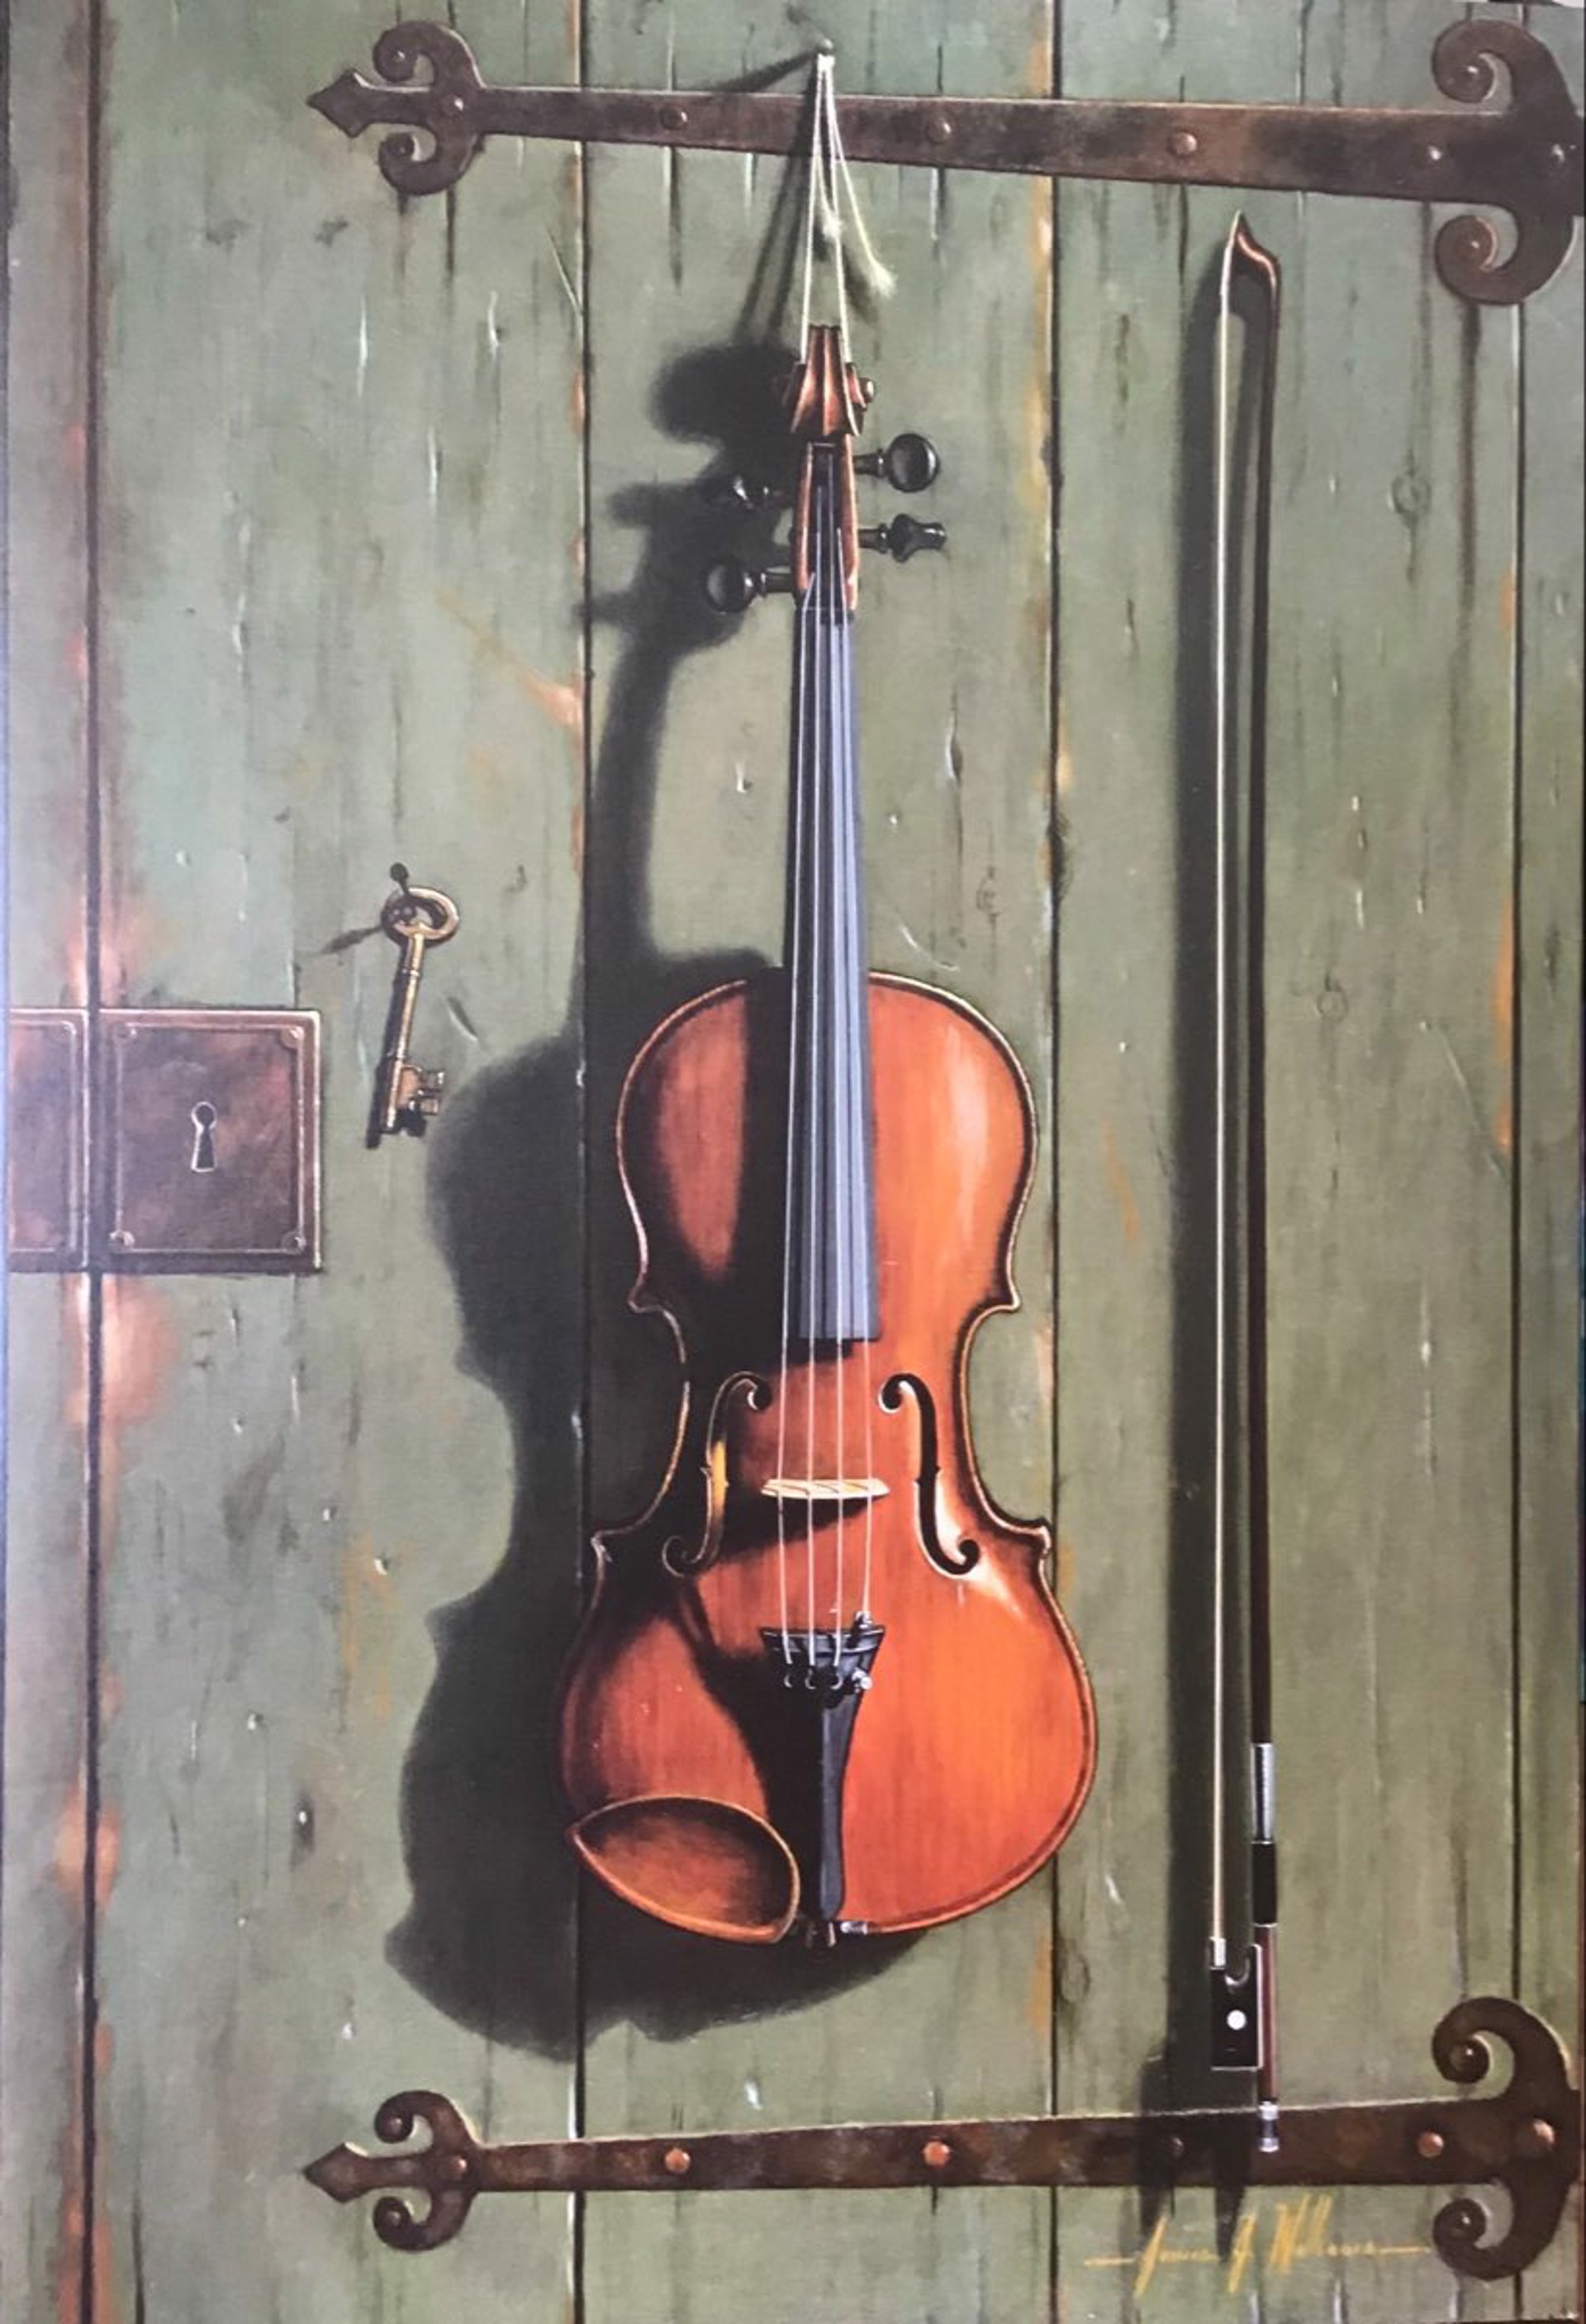 The Violin by James J. Williams